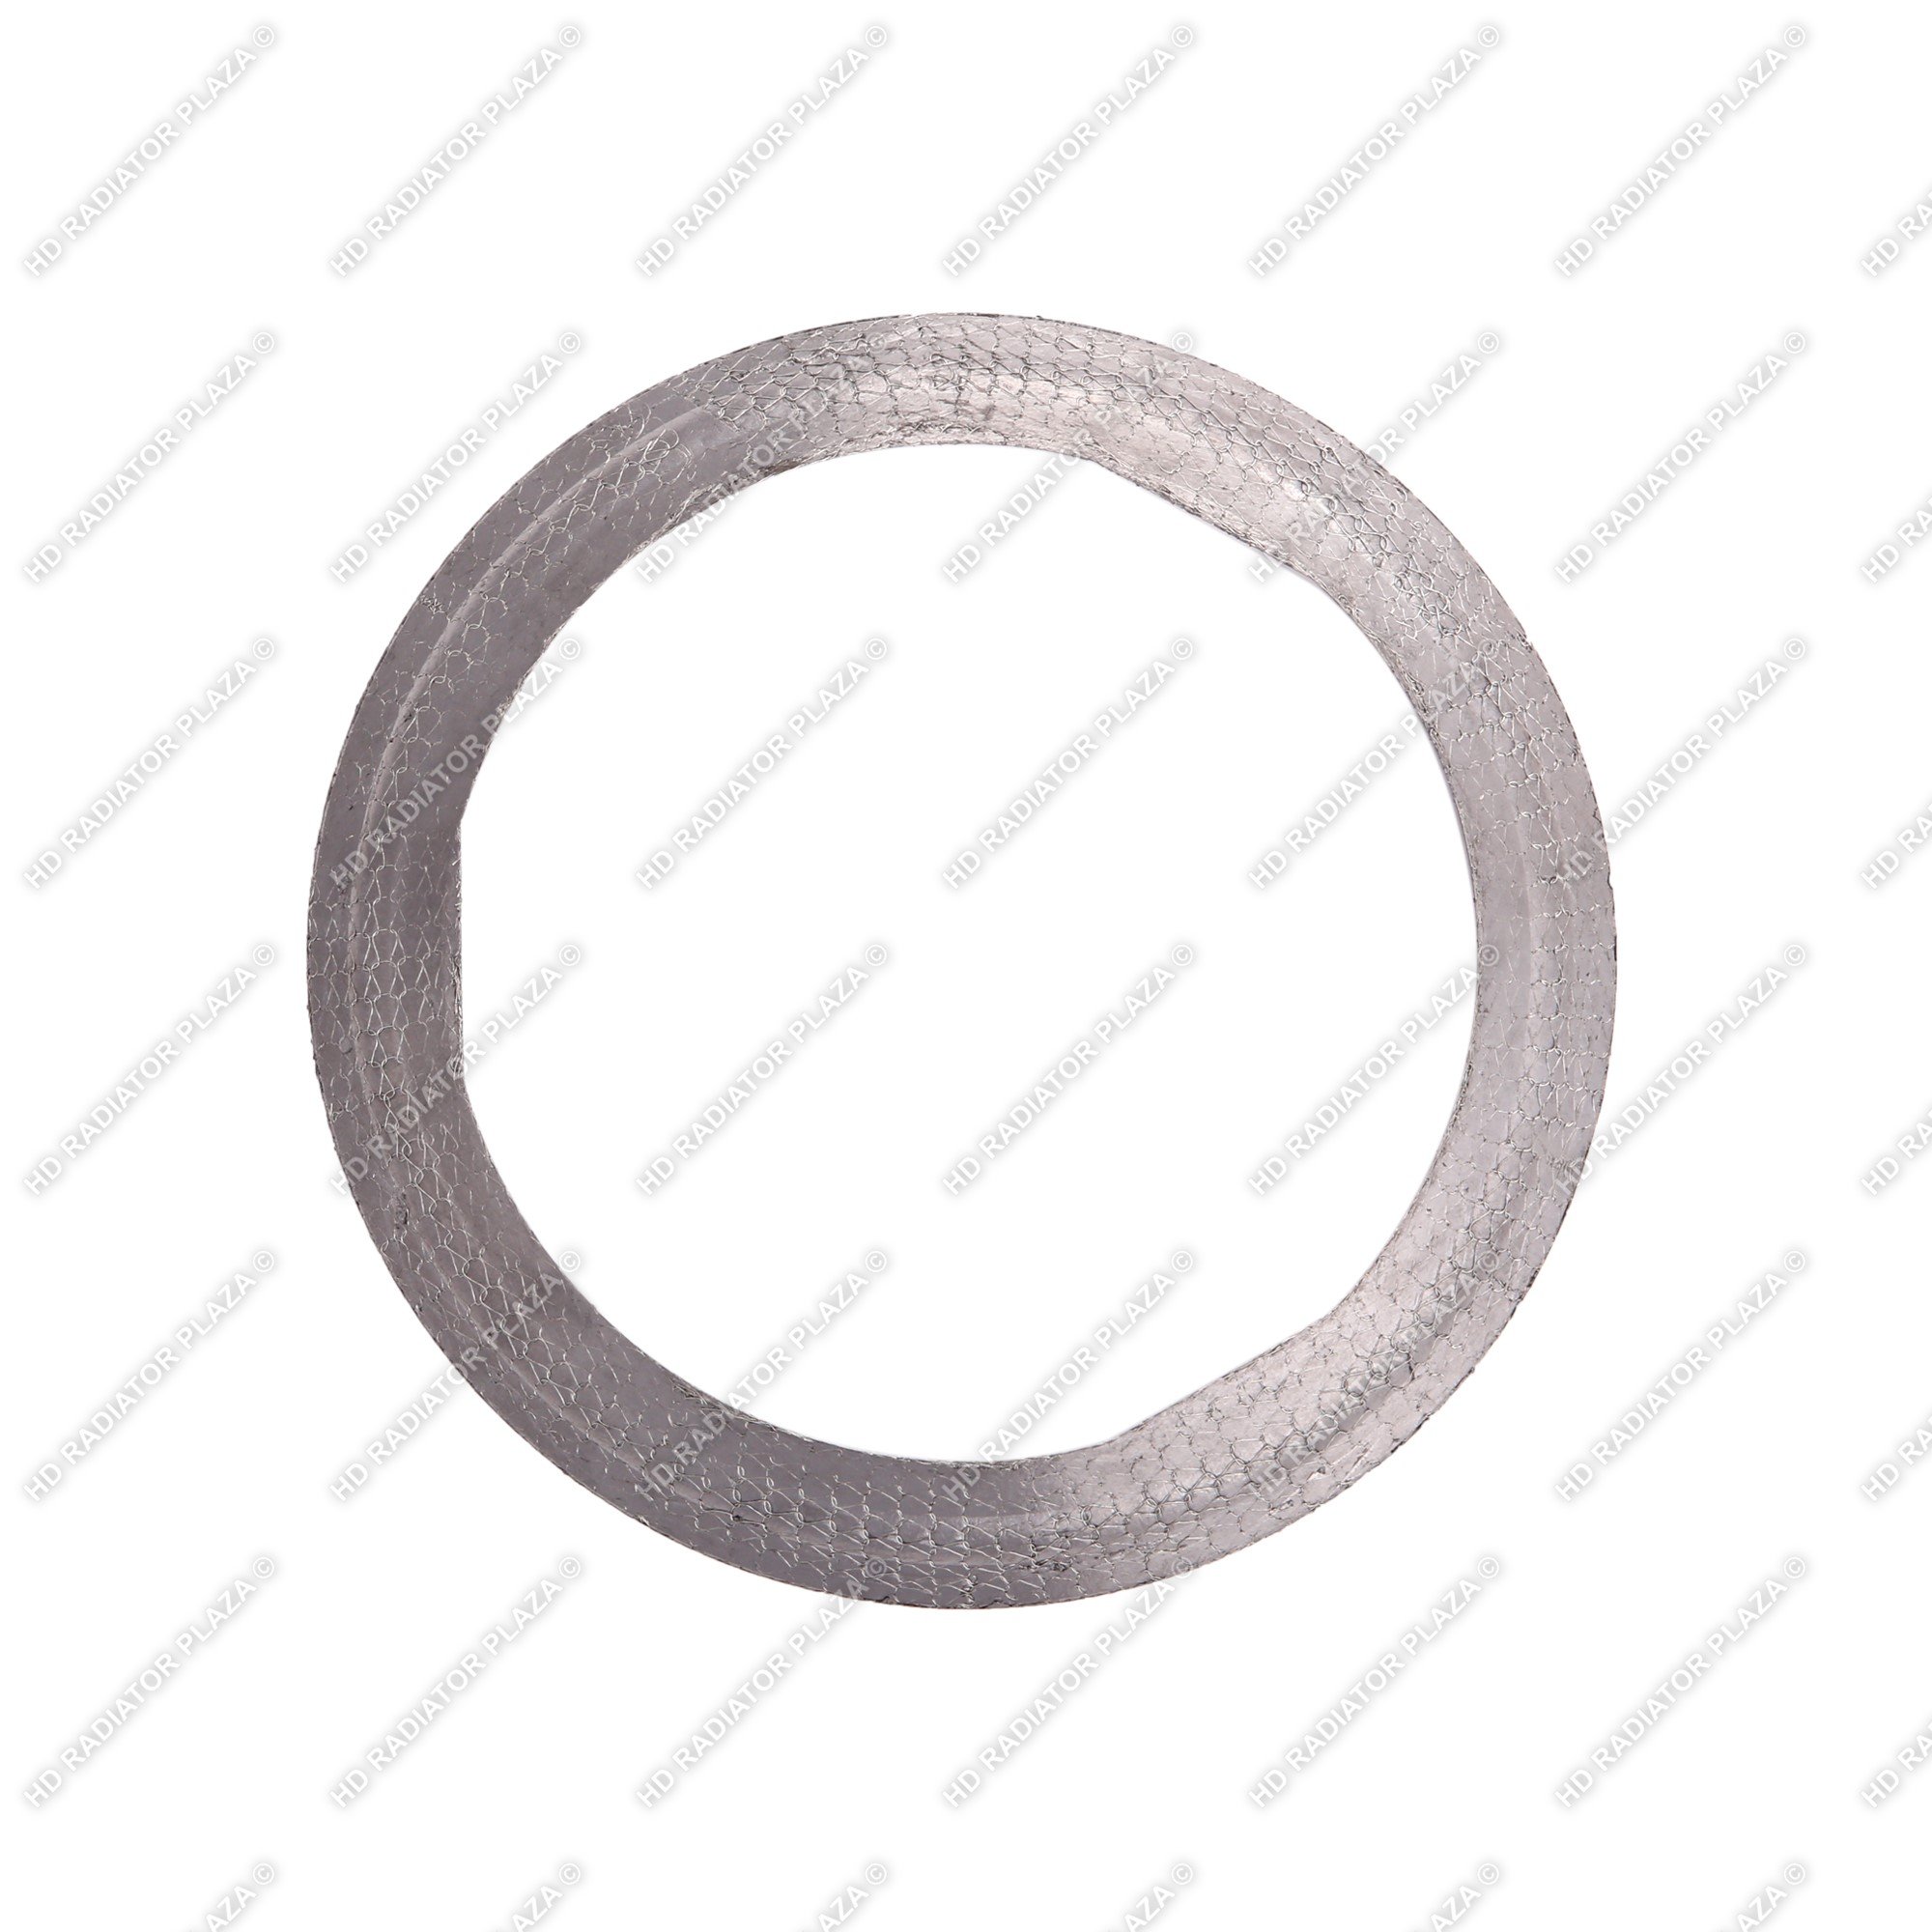 4501012 - GASKET - Paccar 1827320PE 5" Coned Inlet 6.25" OD x 4.875" ID